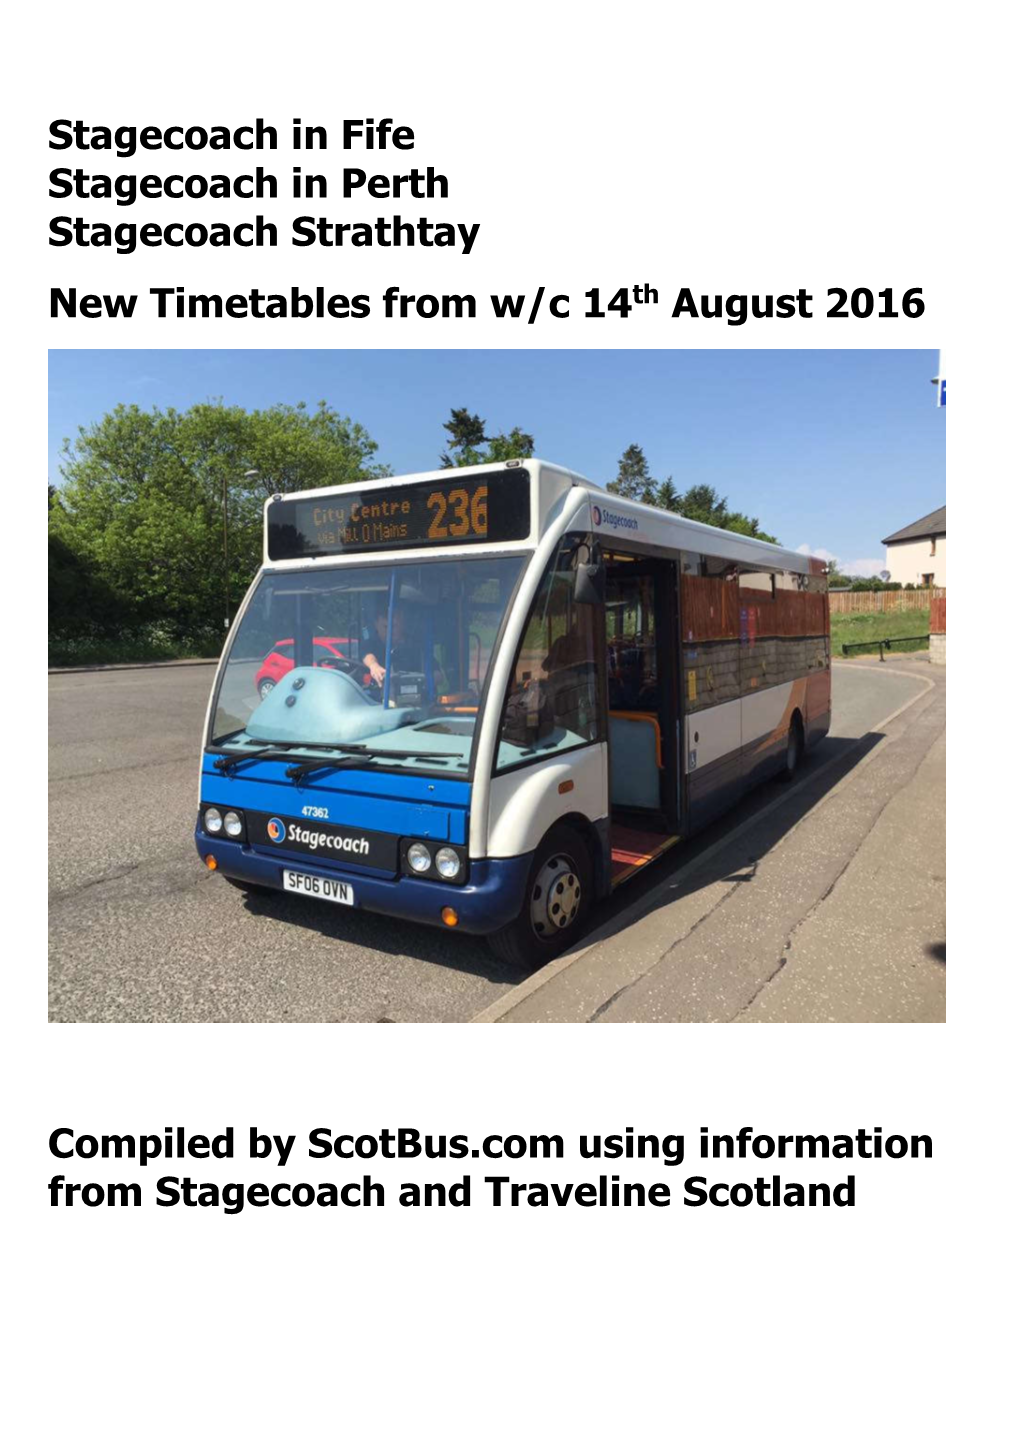 Stagecoach in Fife Stagecoach in Perth Stagecoach Strathtay New Timetables from W/C 14Th August 2016